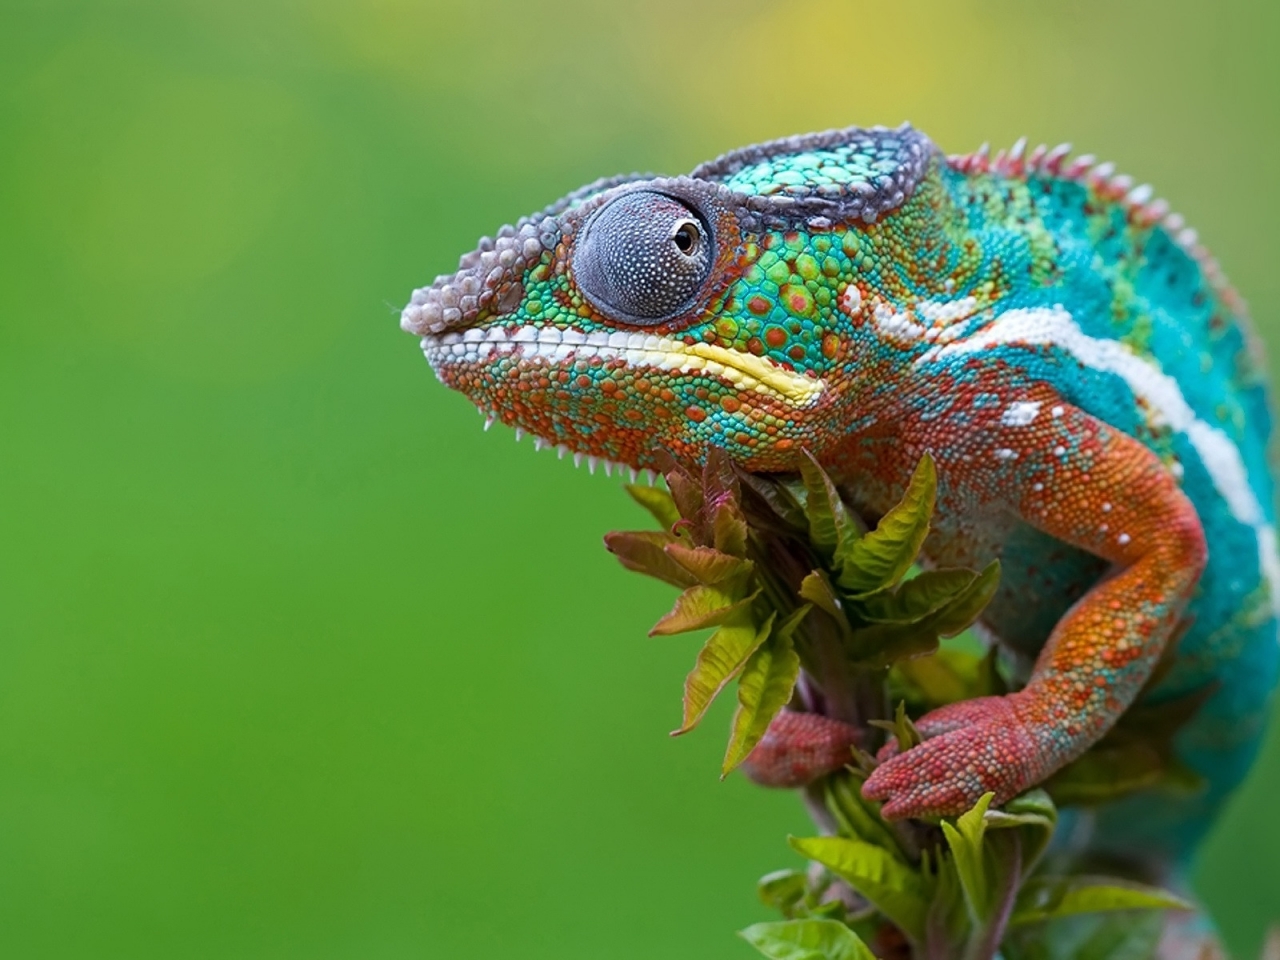 Chameleon Camouflage for 1280 x 960 resolution